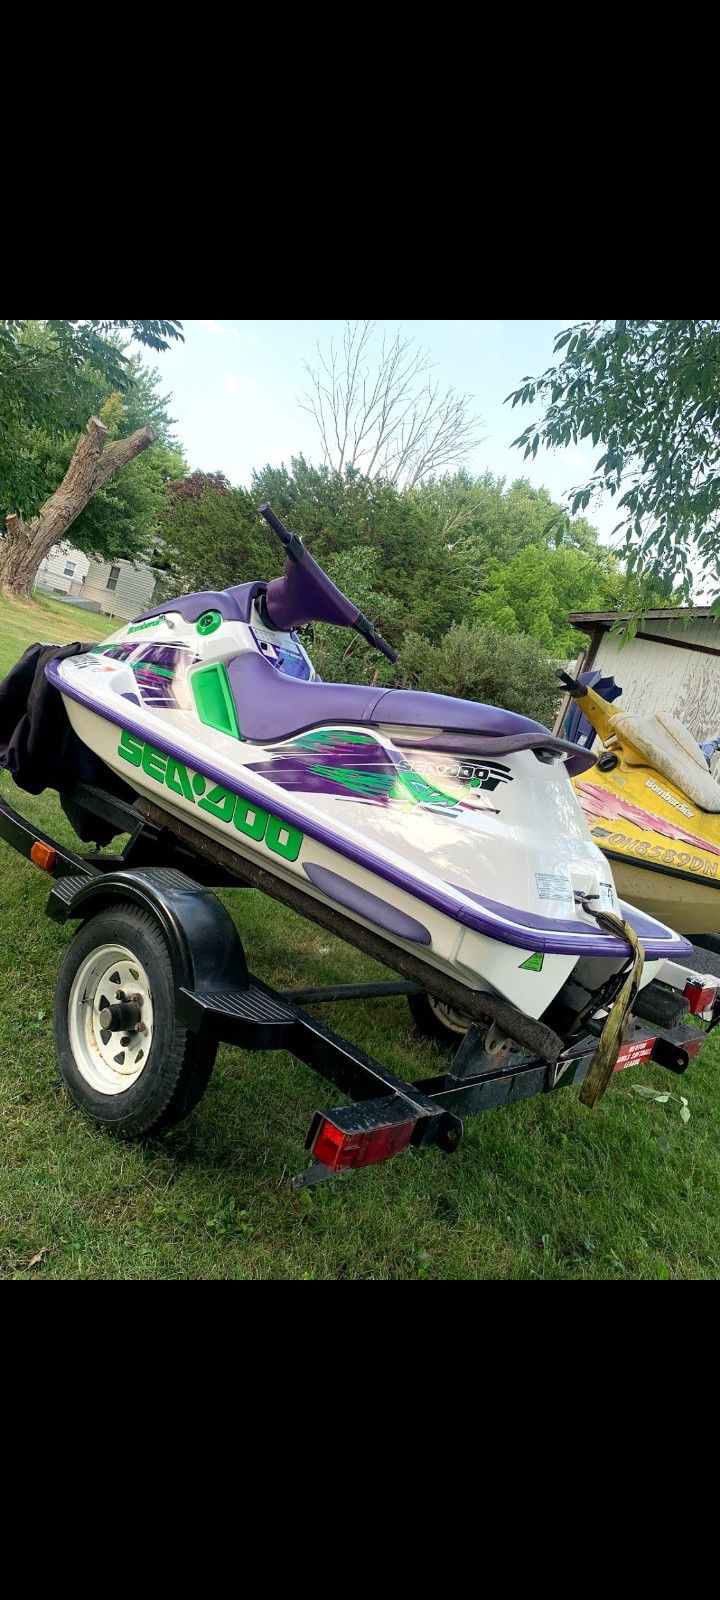 Clean 96 Seadoo Spi With Trailer And Cover